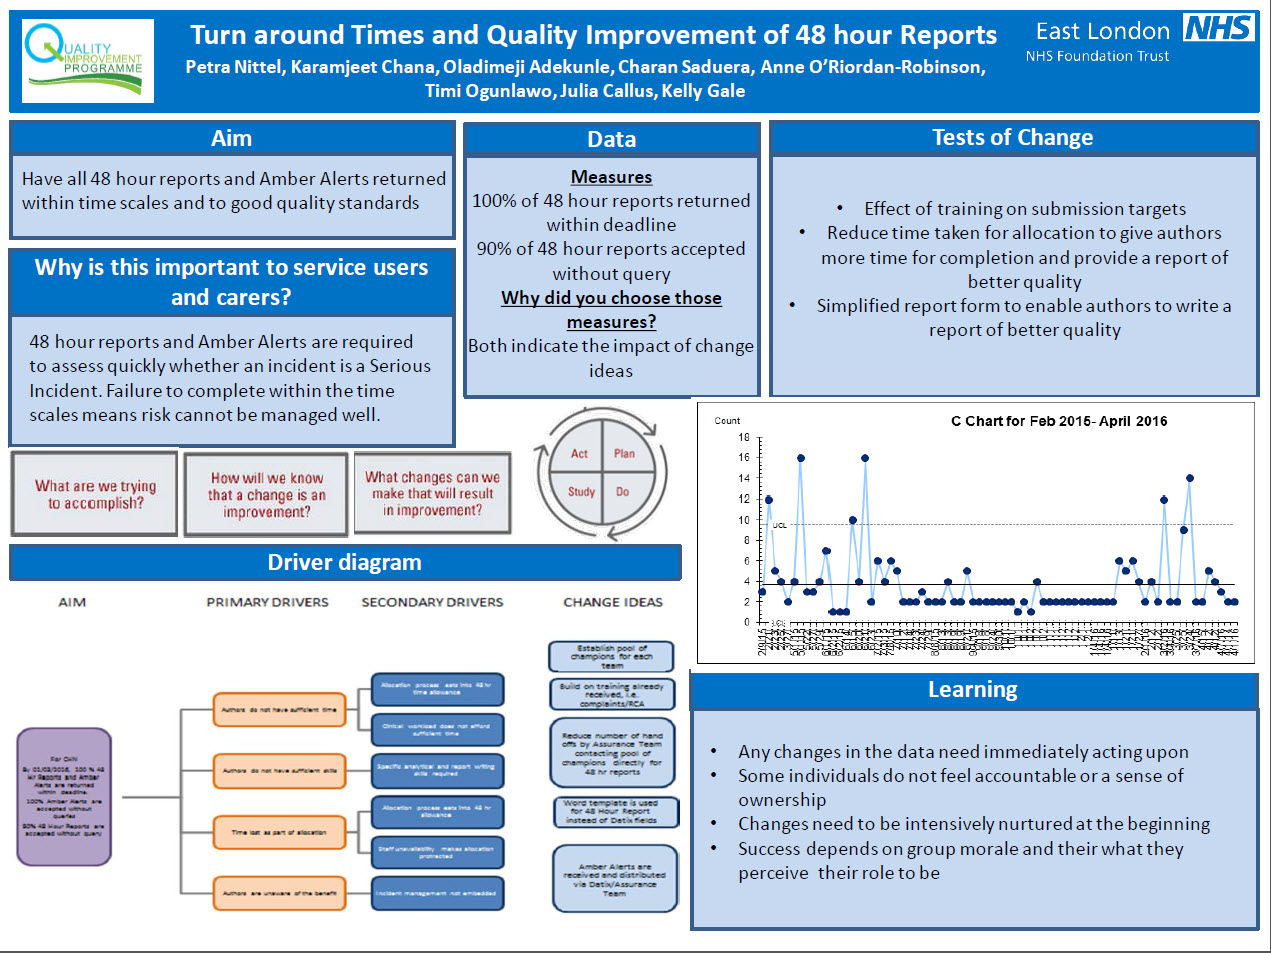 Turn around Times and Quality Improvement of 48 hour Reports - Quality ...